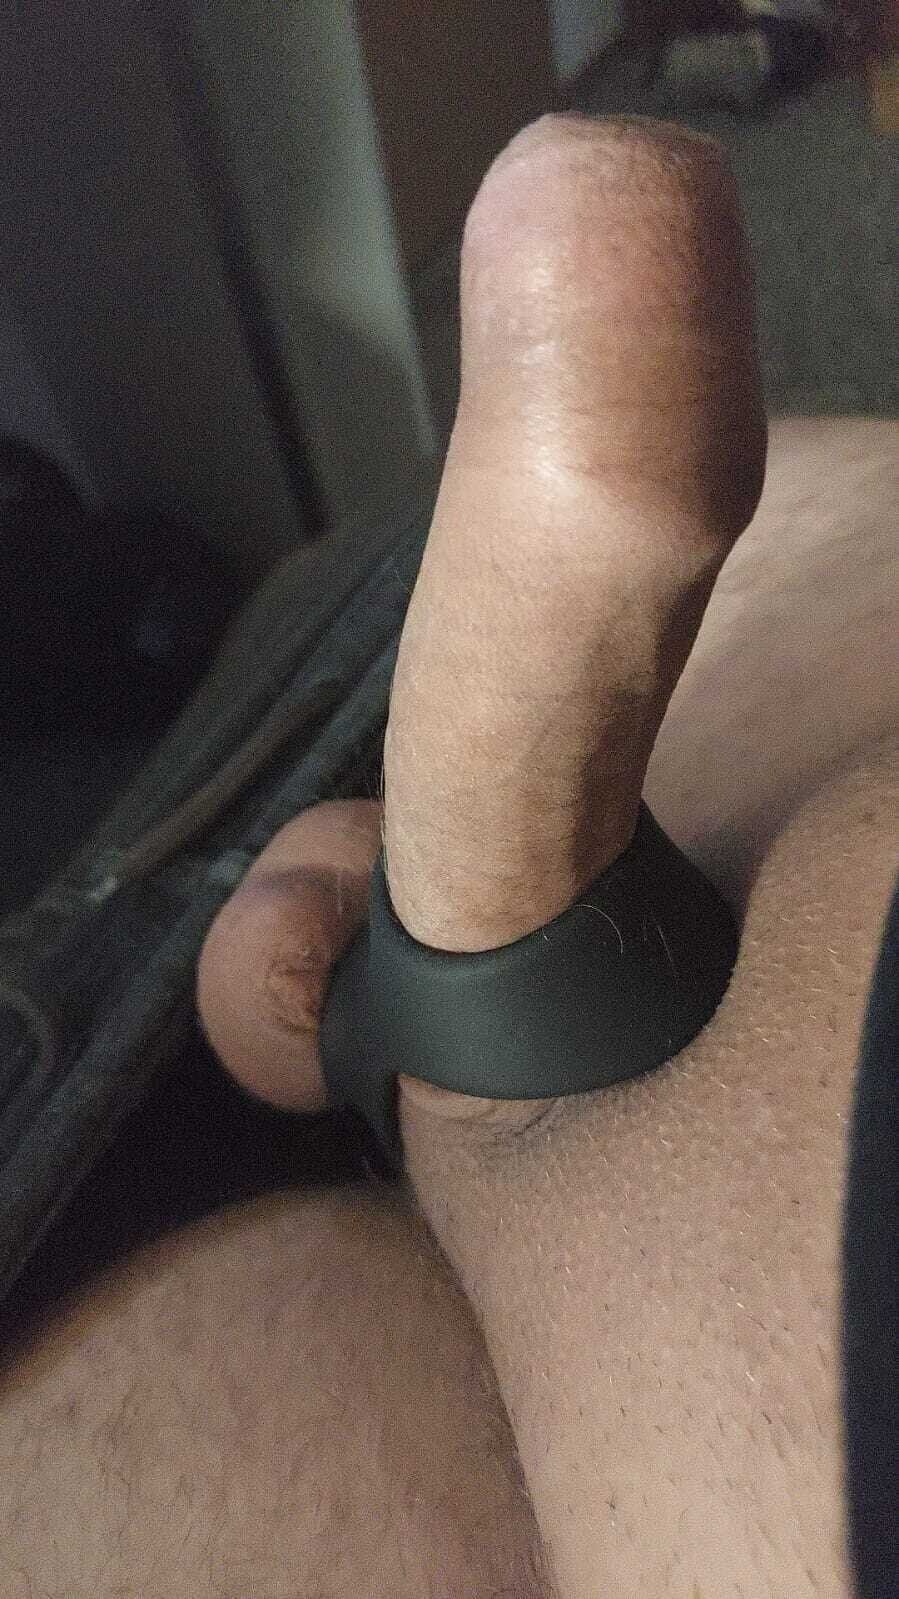 My Ass and Dick